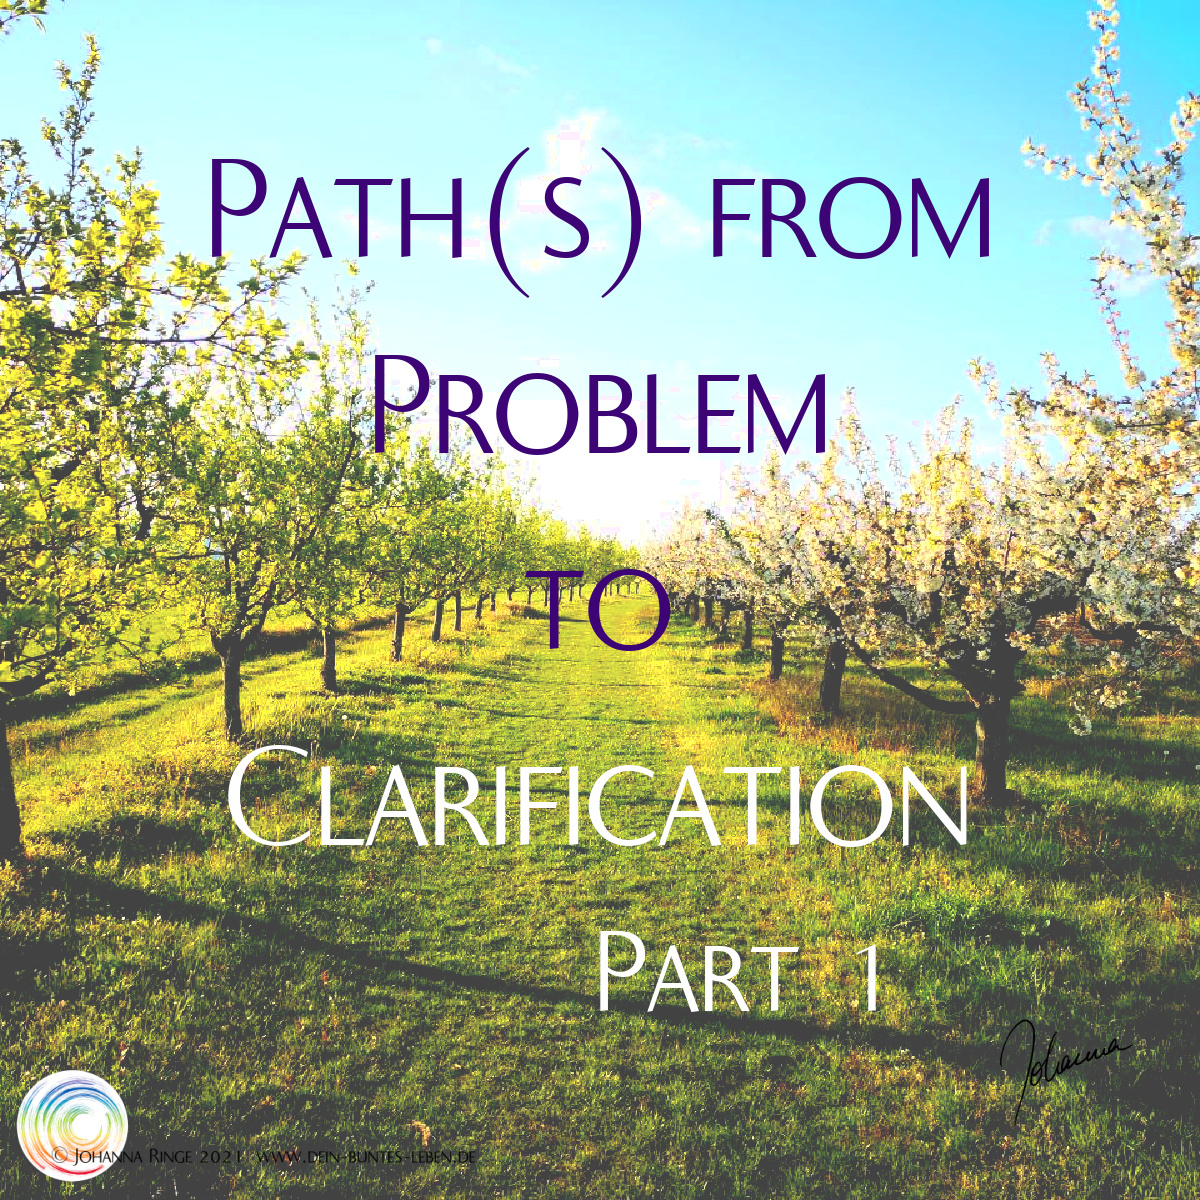 Path(s) from Problem to Clarification